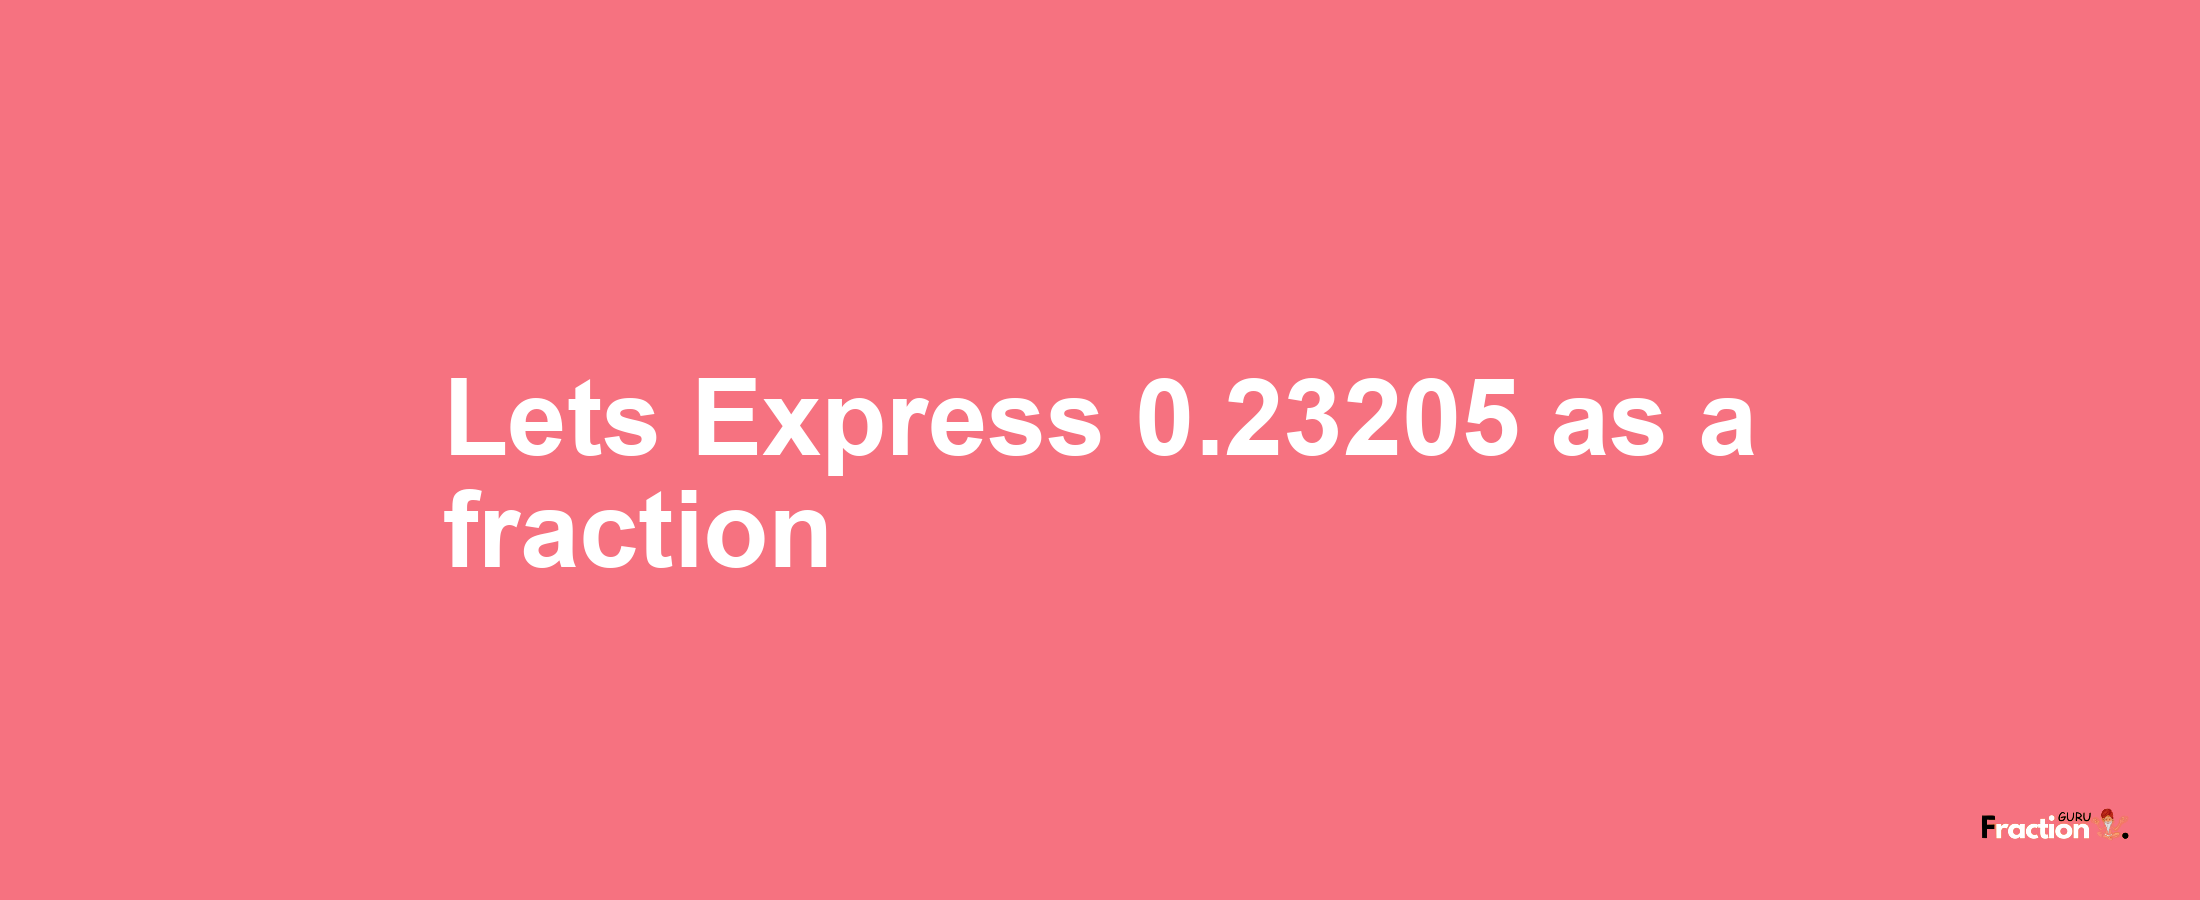 Lets Express 0.23205 as afraction